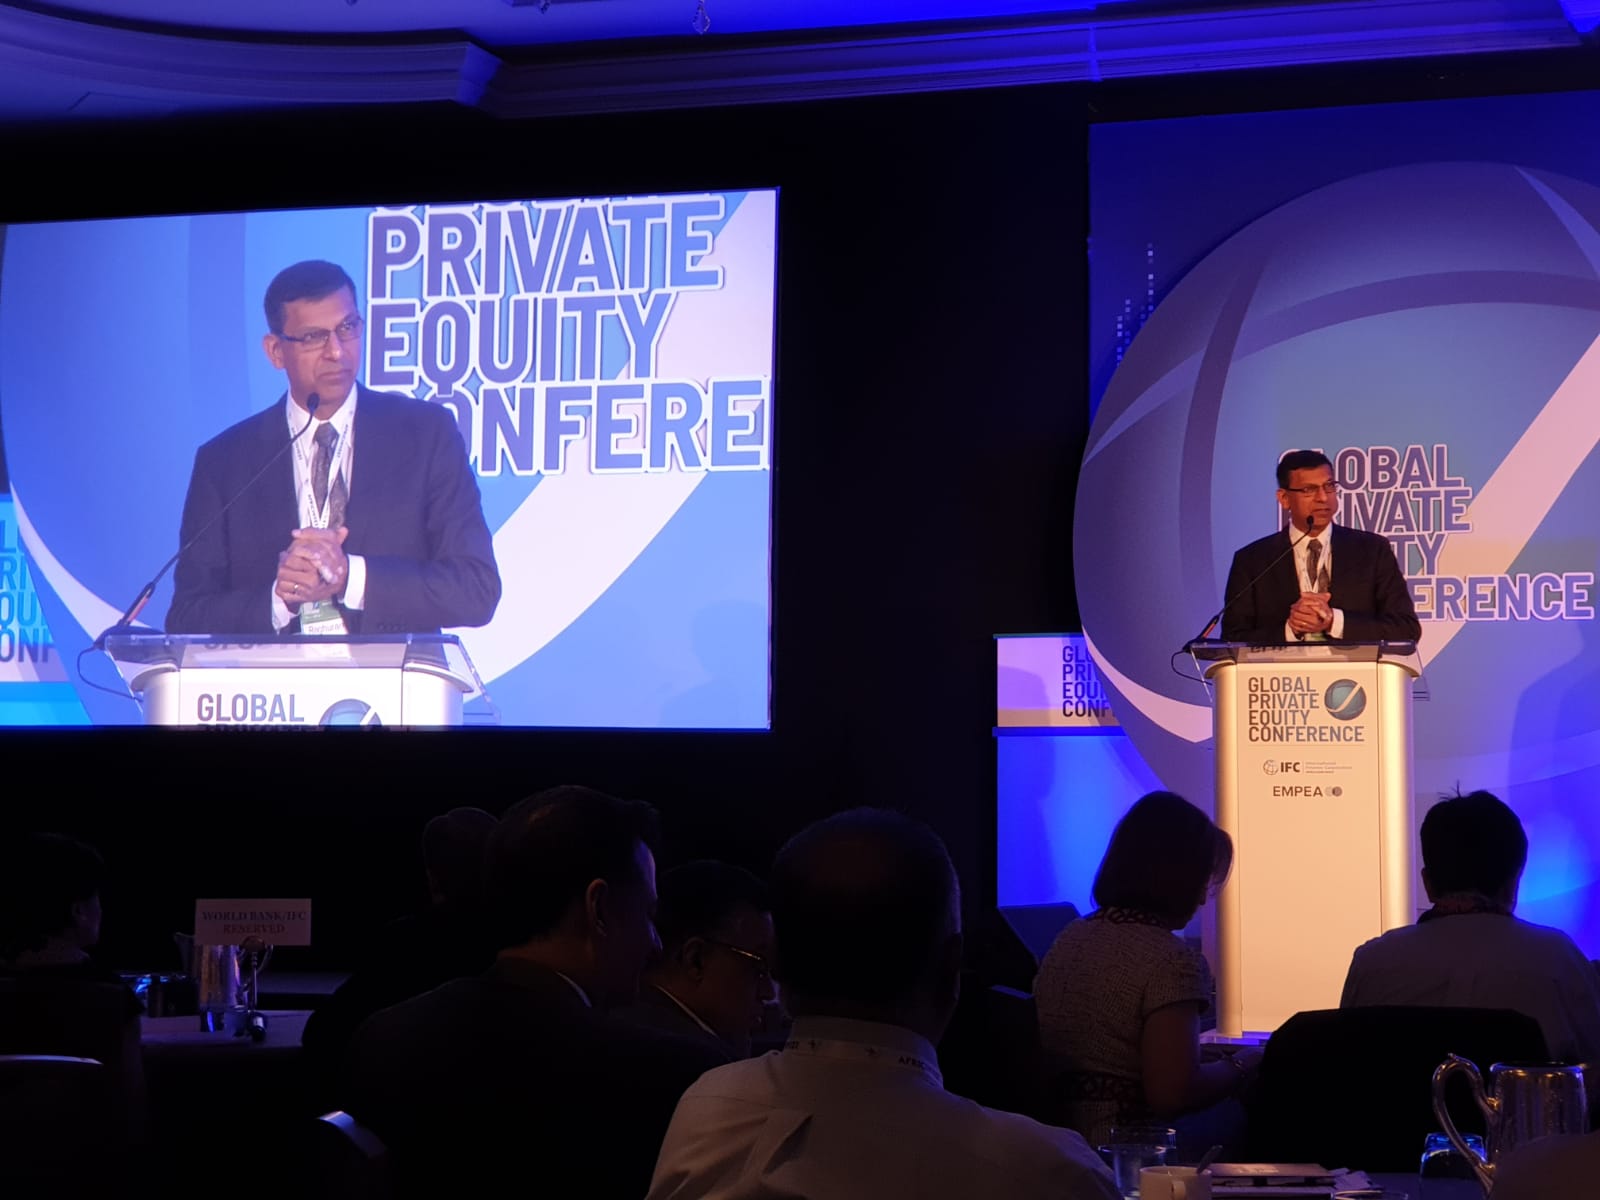 21st IFC-EMPEA Global Private Equity Conference in Washington DC, 13-15 May 2019